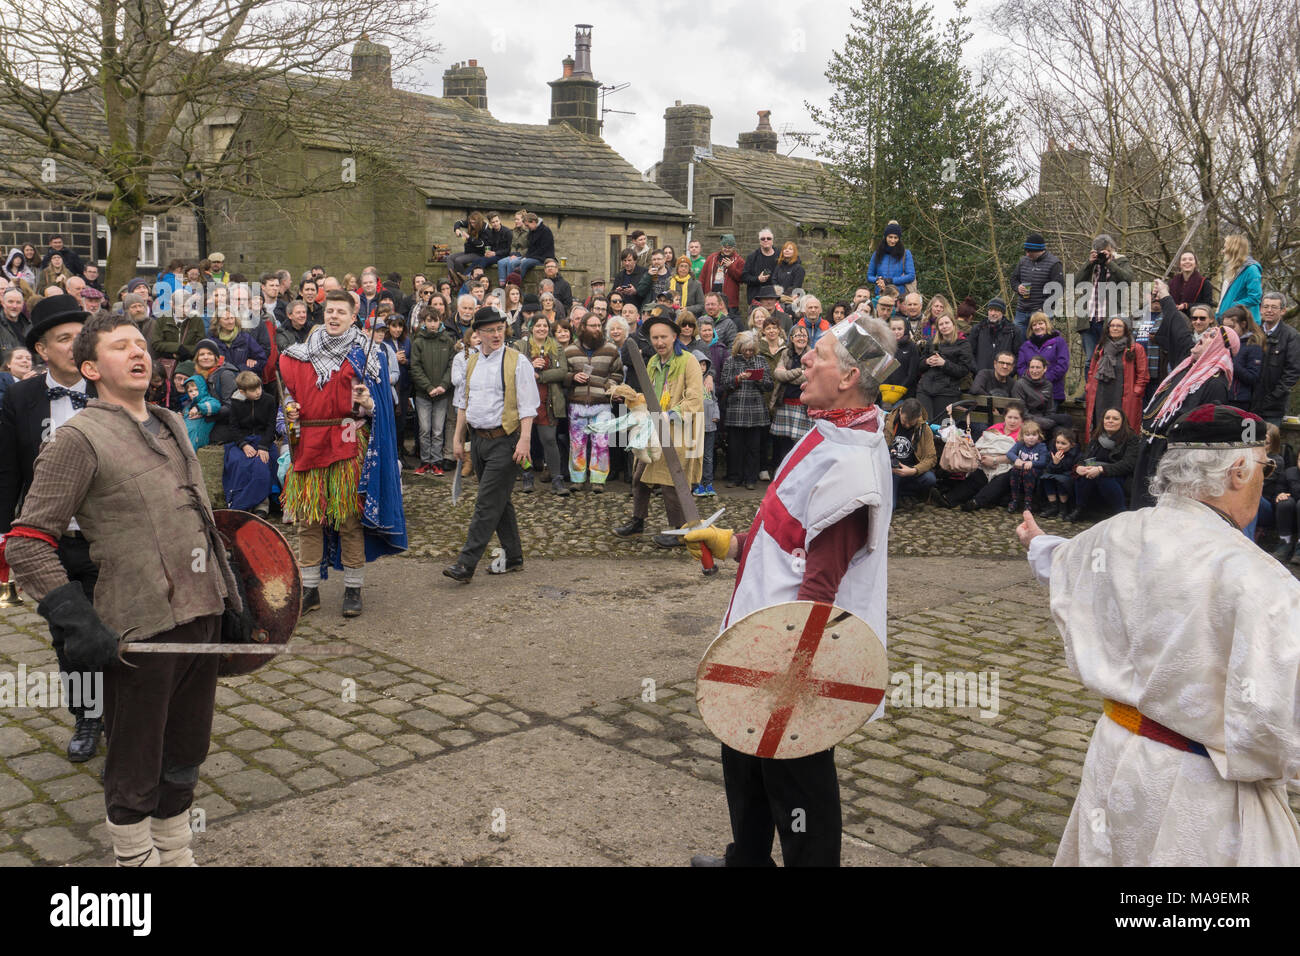 Heptonstall, UK. 30th March, 2018. A traditional Pace Egg play is performed in Heptonstall’s Weavers Square on Good Fridays, attracting hundreds of visitors to the village. The origins are uncertain, but some version of the plays have undoubtedly been performed over many hundreds of years. In the play St George takes on contenders such as Bold Slasher, the Black Prince of Paradine and Hector. Credit: Steve Morgan/Alamy Live News Stock Photo